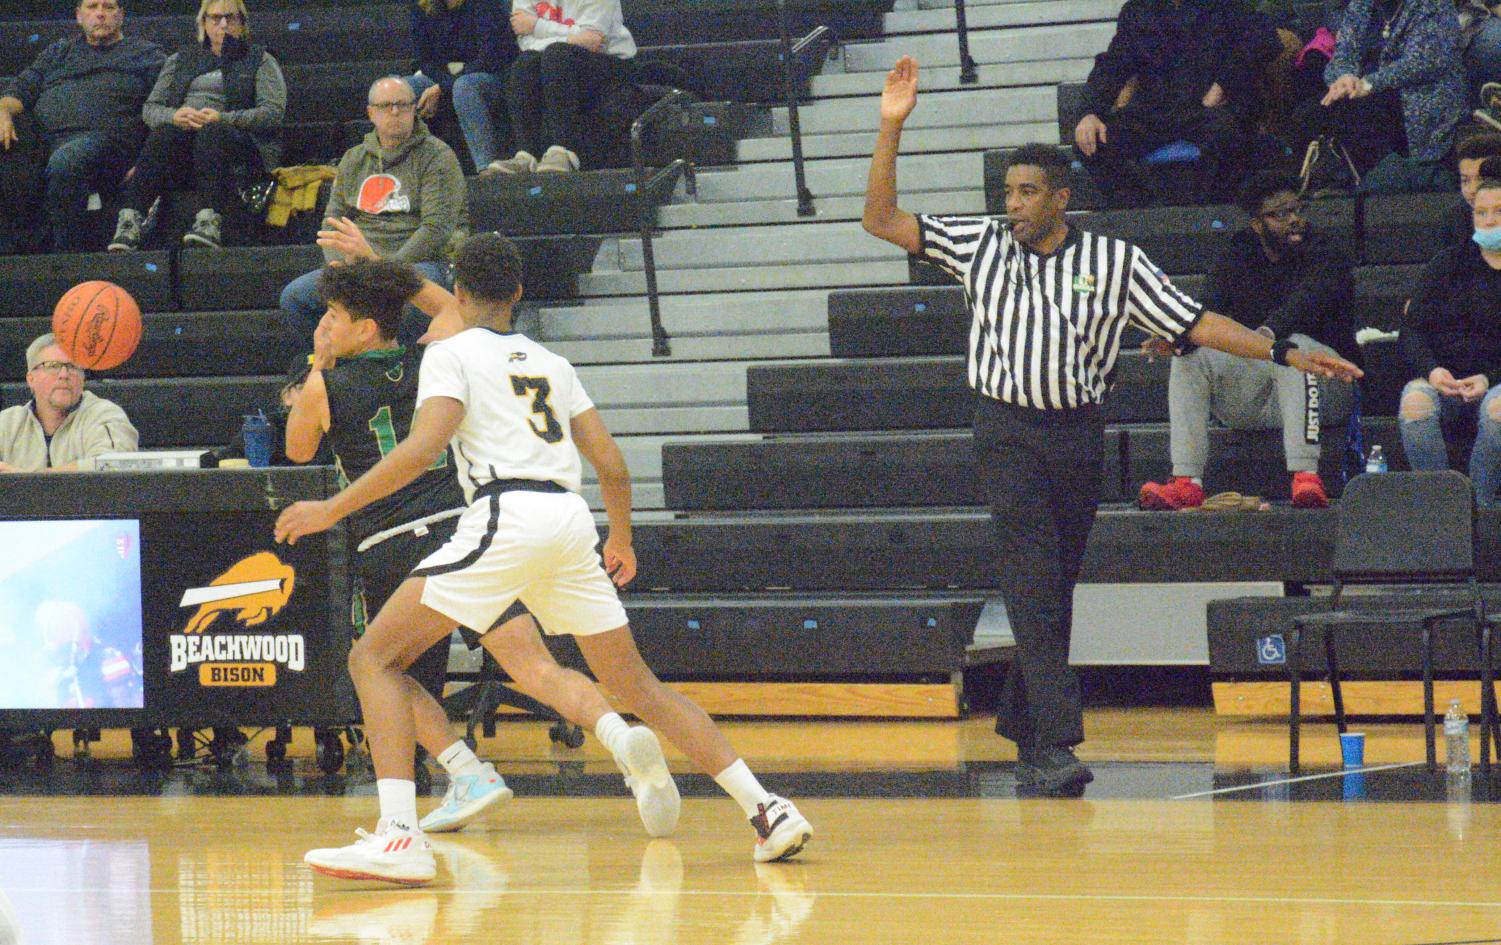 An official calls a foul during the Bison home game against Lakeside on Dec. 10.